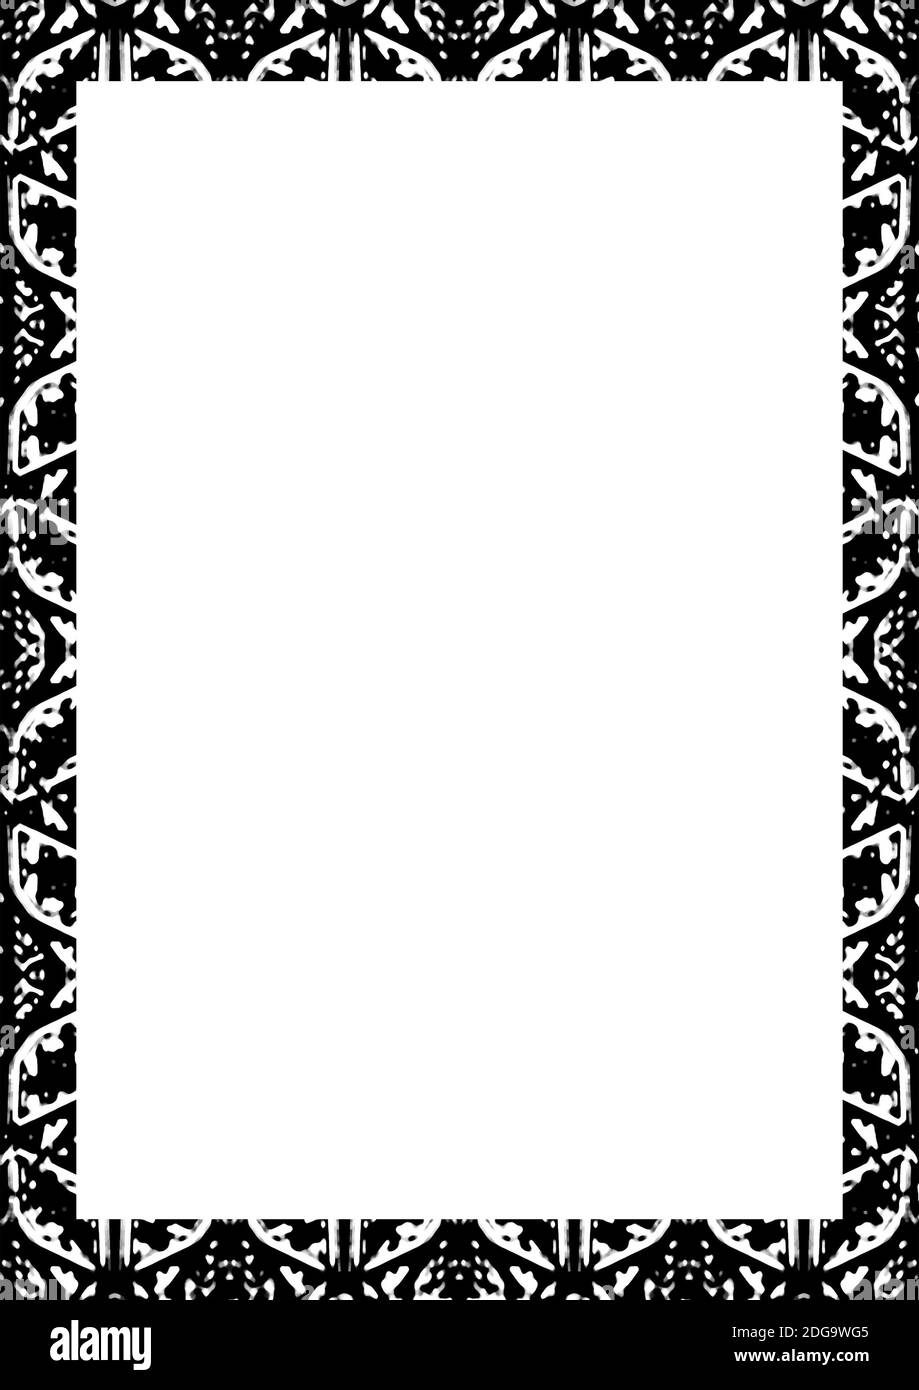 Blank Frame with Black and White Ornate Borders Stock Photo - Alamy